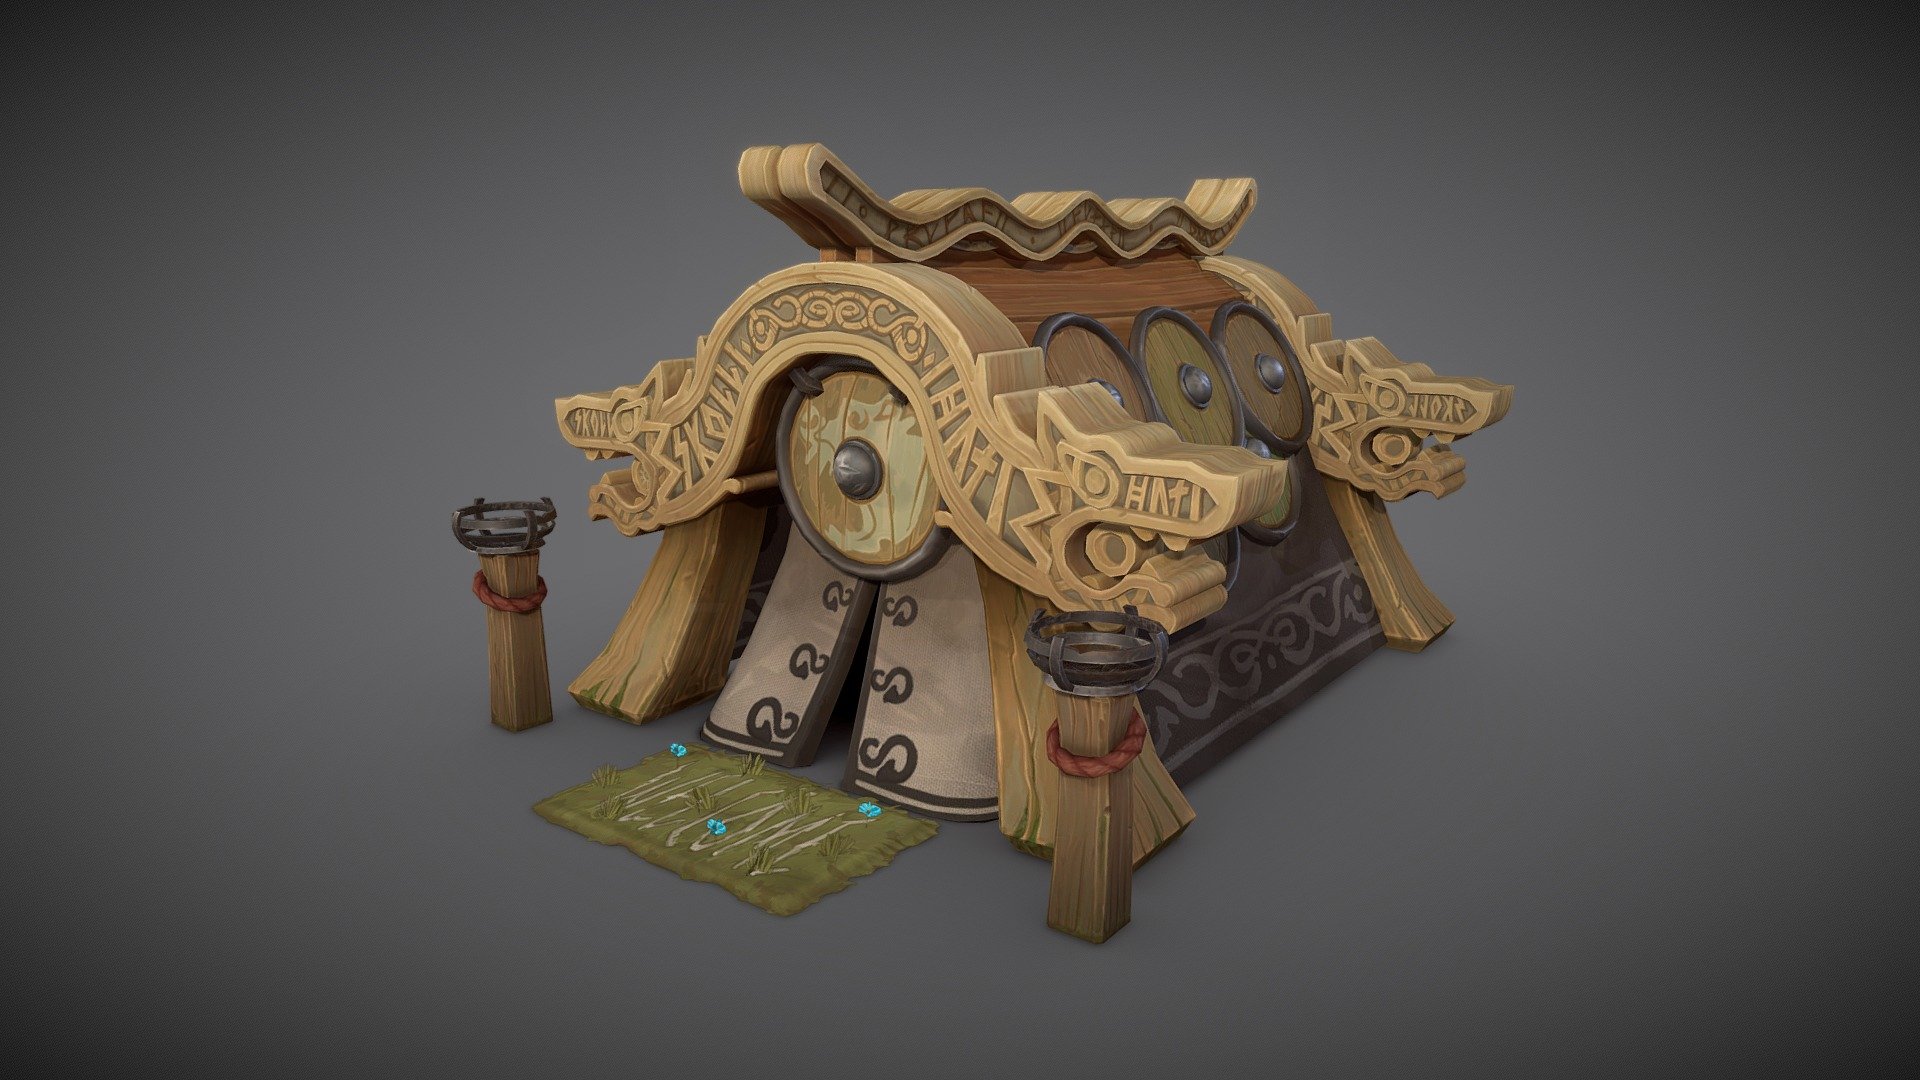 Hey! Here's a viking house I created using a super cool concept from Geraud Soulie. Hope you like it :)

Concept: https://www.artstation.com/artwork/Al5Pxo

https://www.artstation.com/andrew_melfi - Viking House - 3D model by andrewmelfi 3d model